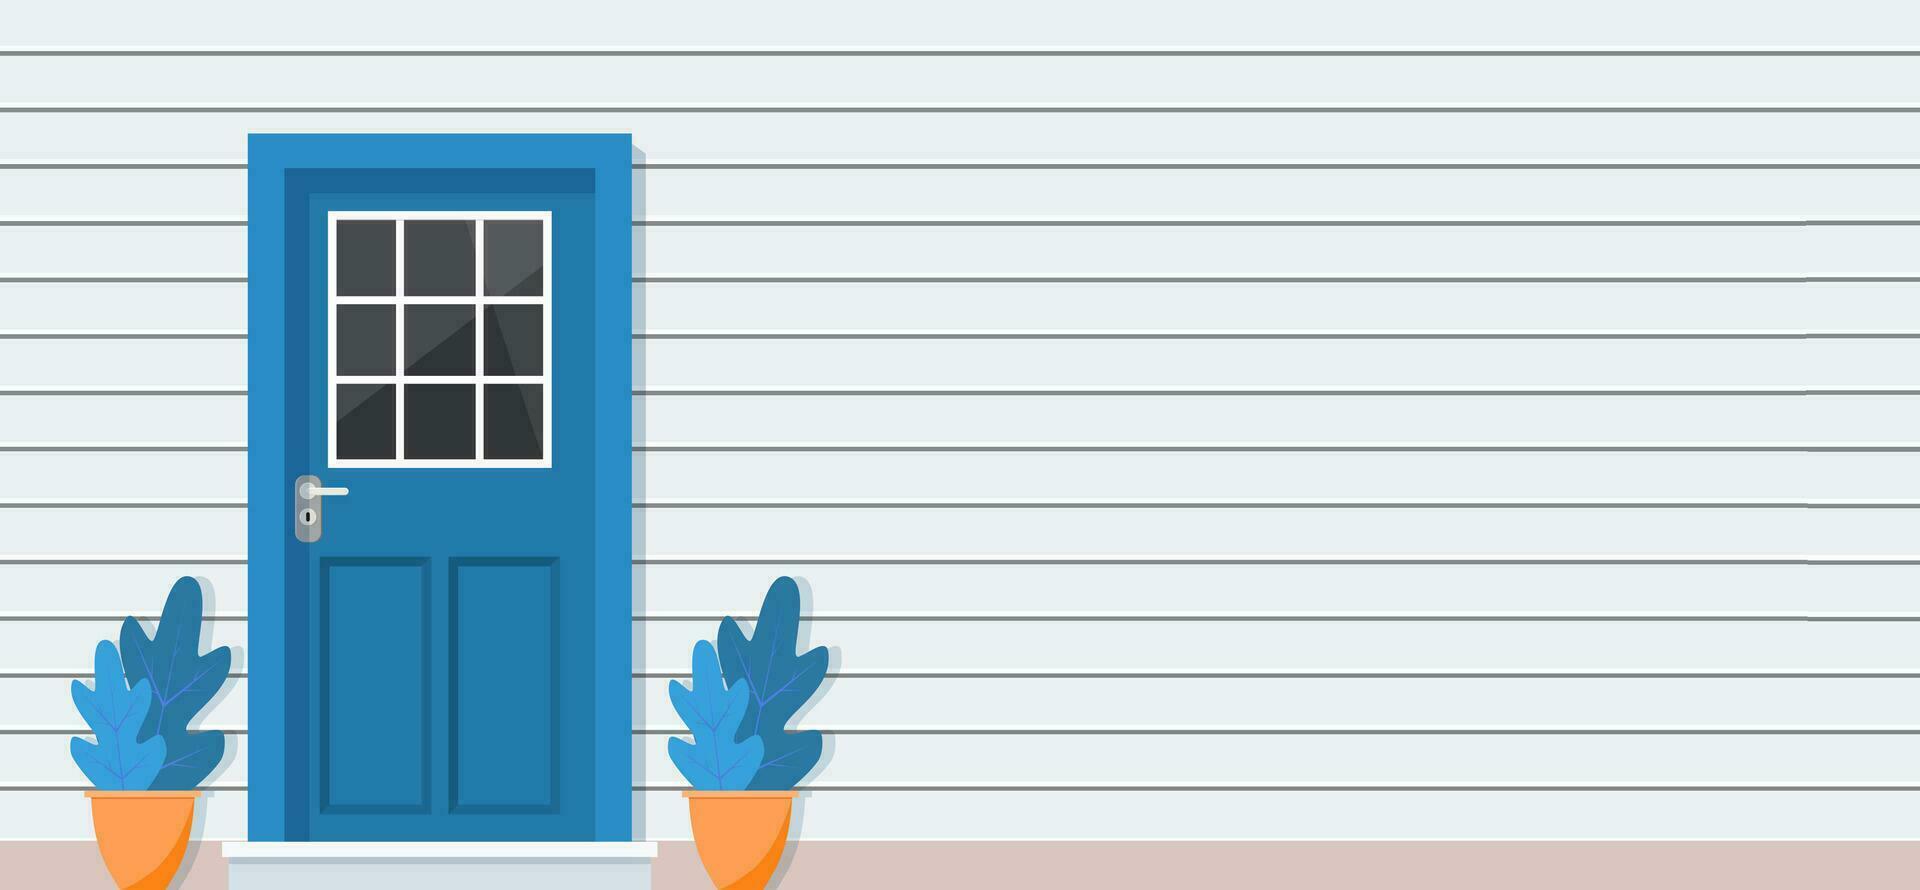 Wooden door of house front view, architecture background, building home real estate backdrop. Vector illustration in flat style